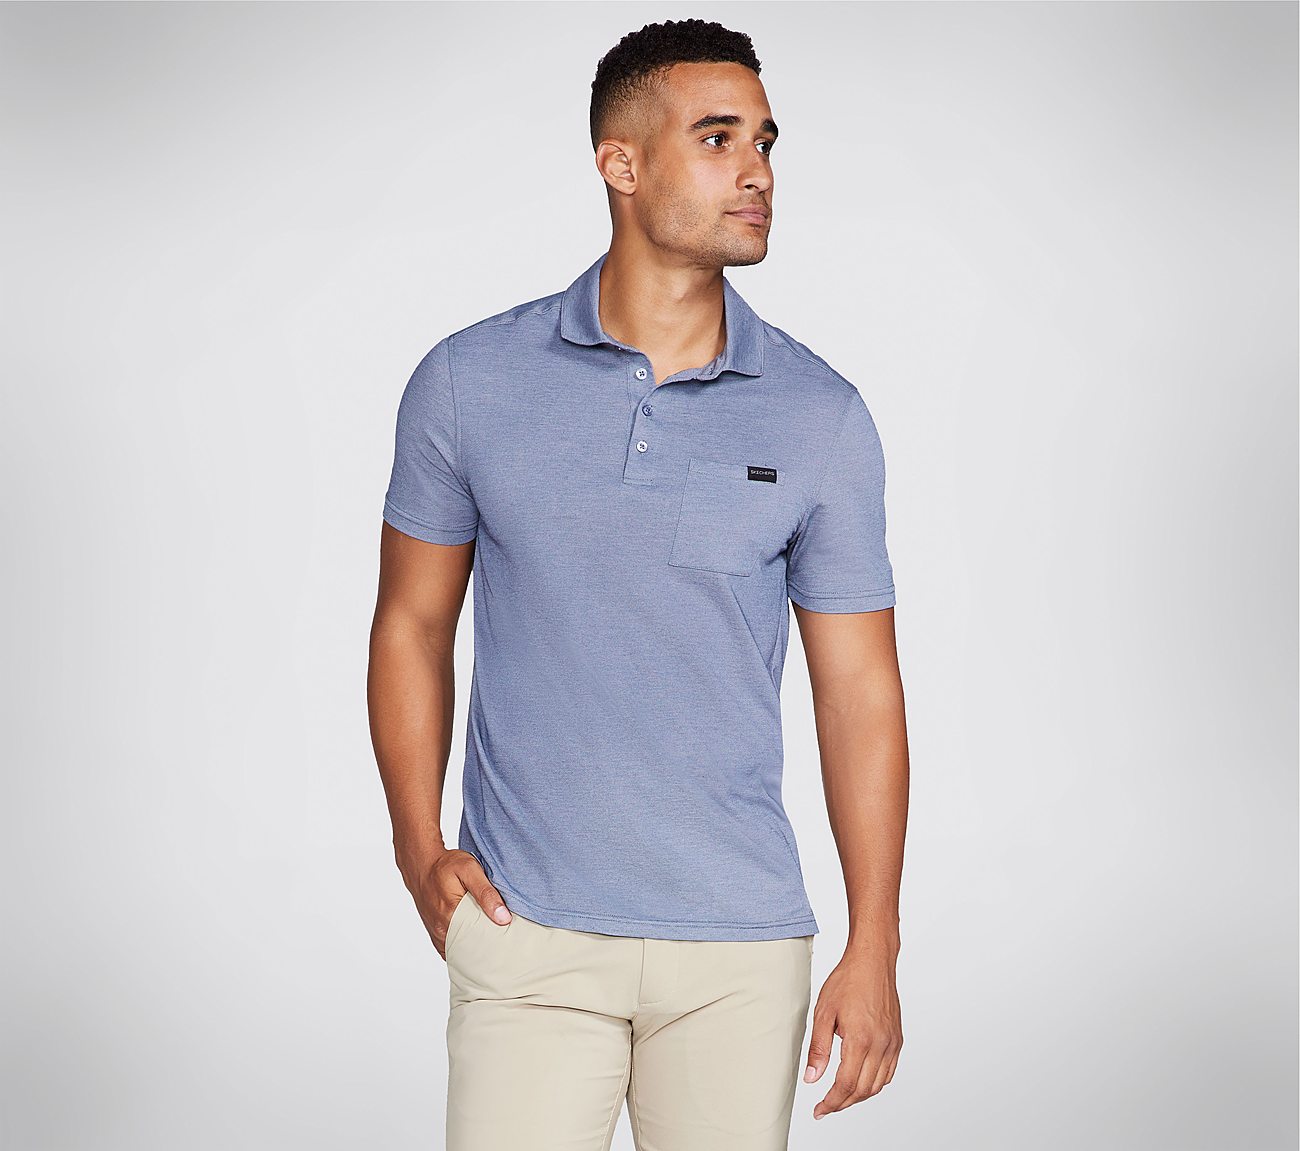 skechers polo shirt mens for sale